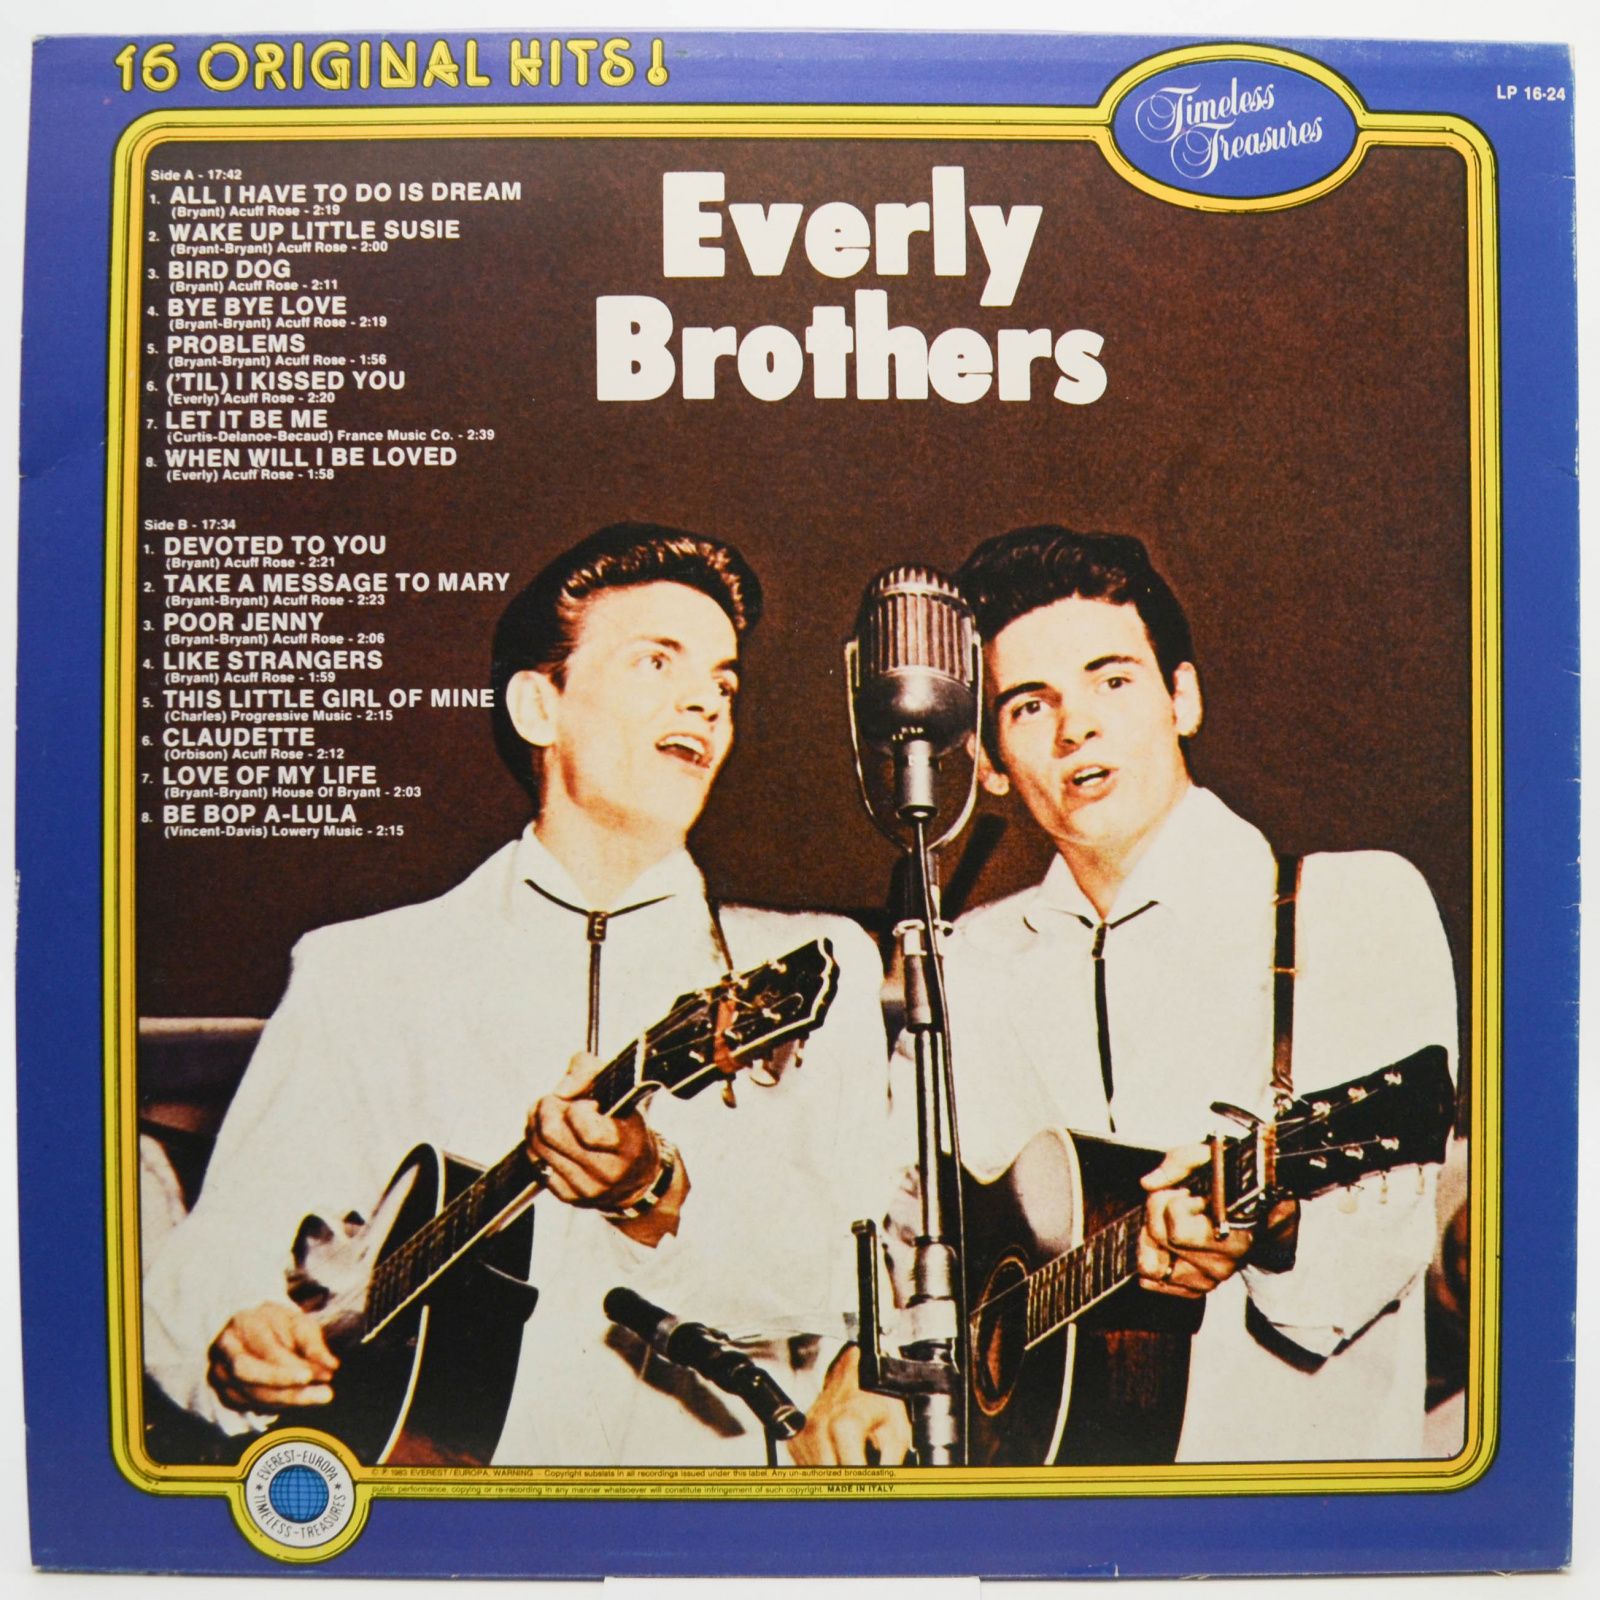 Everly Brothers — 16 Original Hits!, 1984